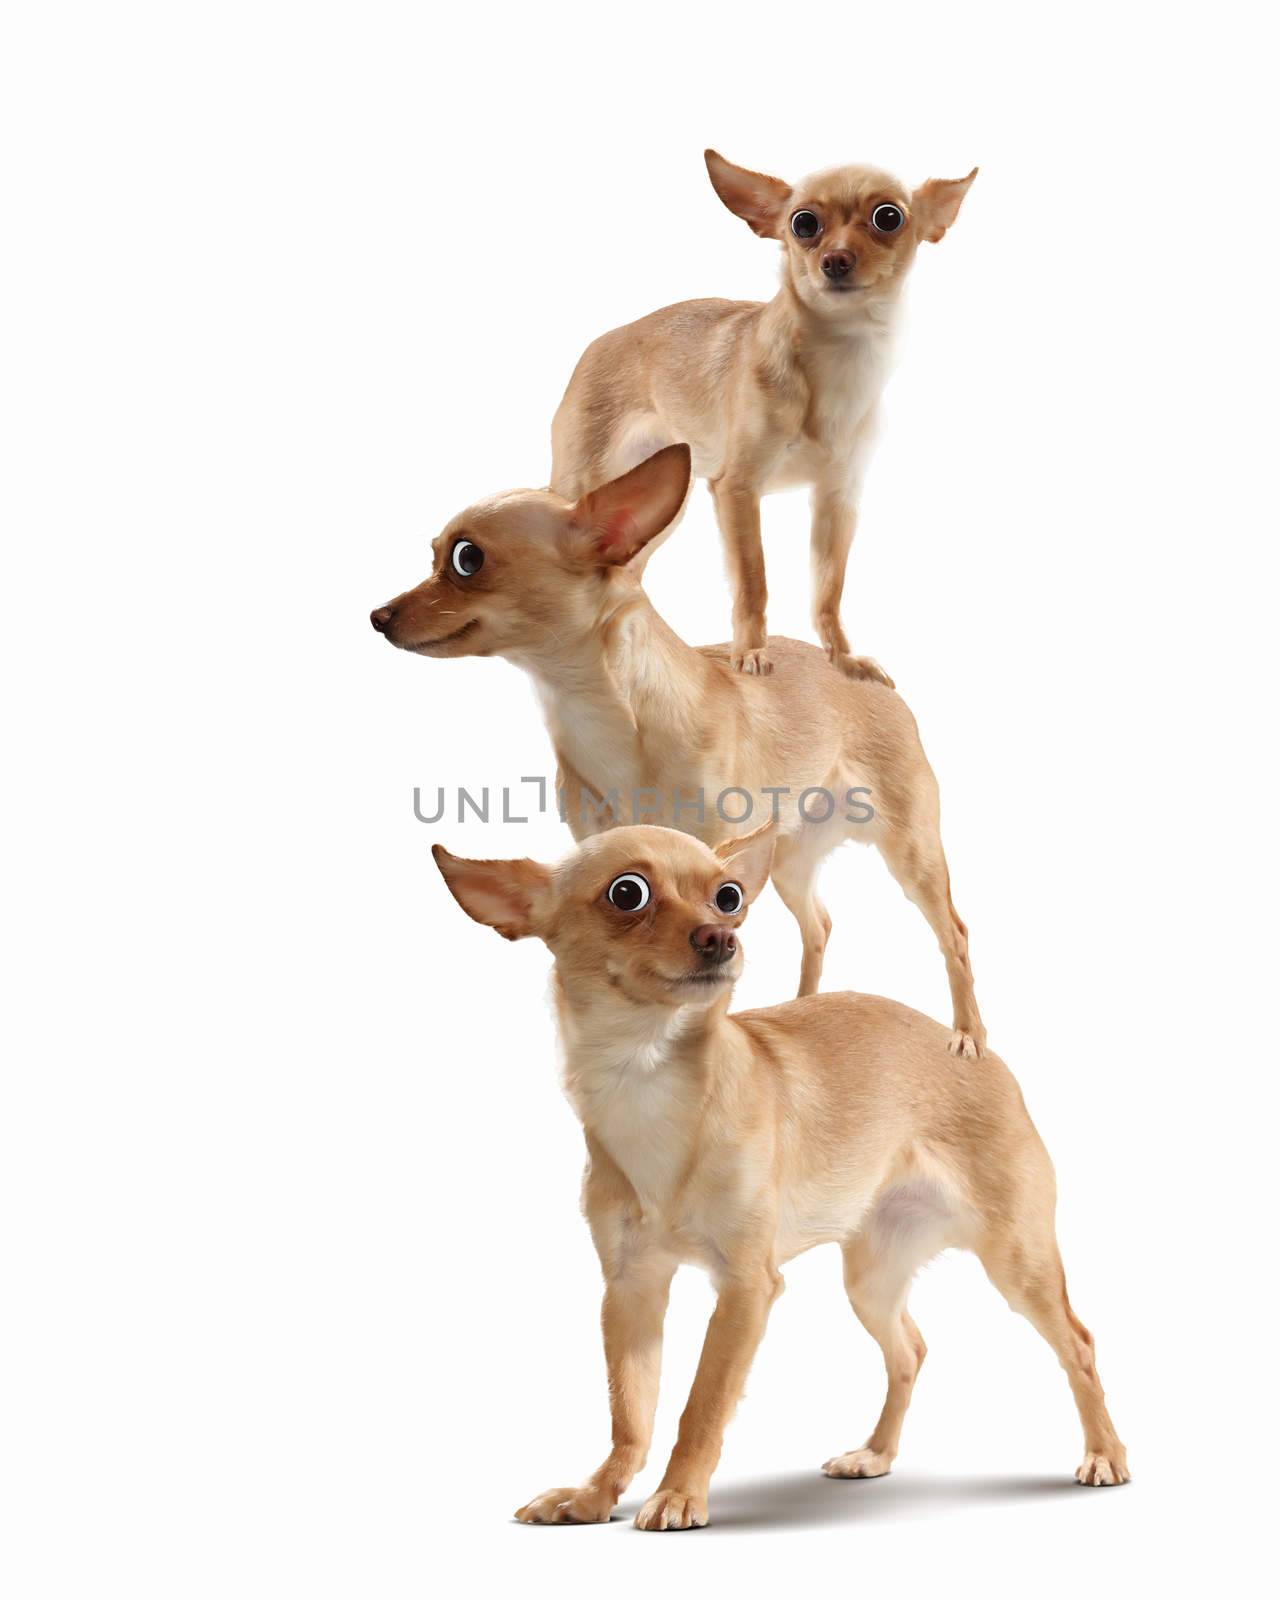 Pyramid of three funny dogs by sergey_nivens